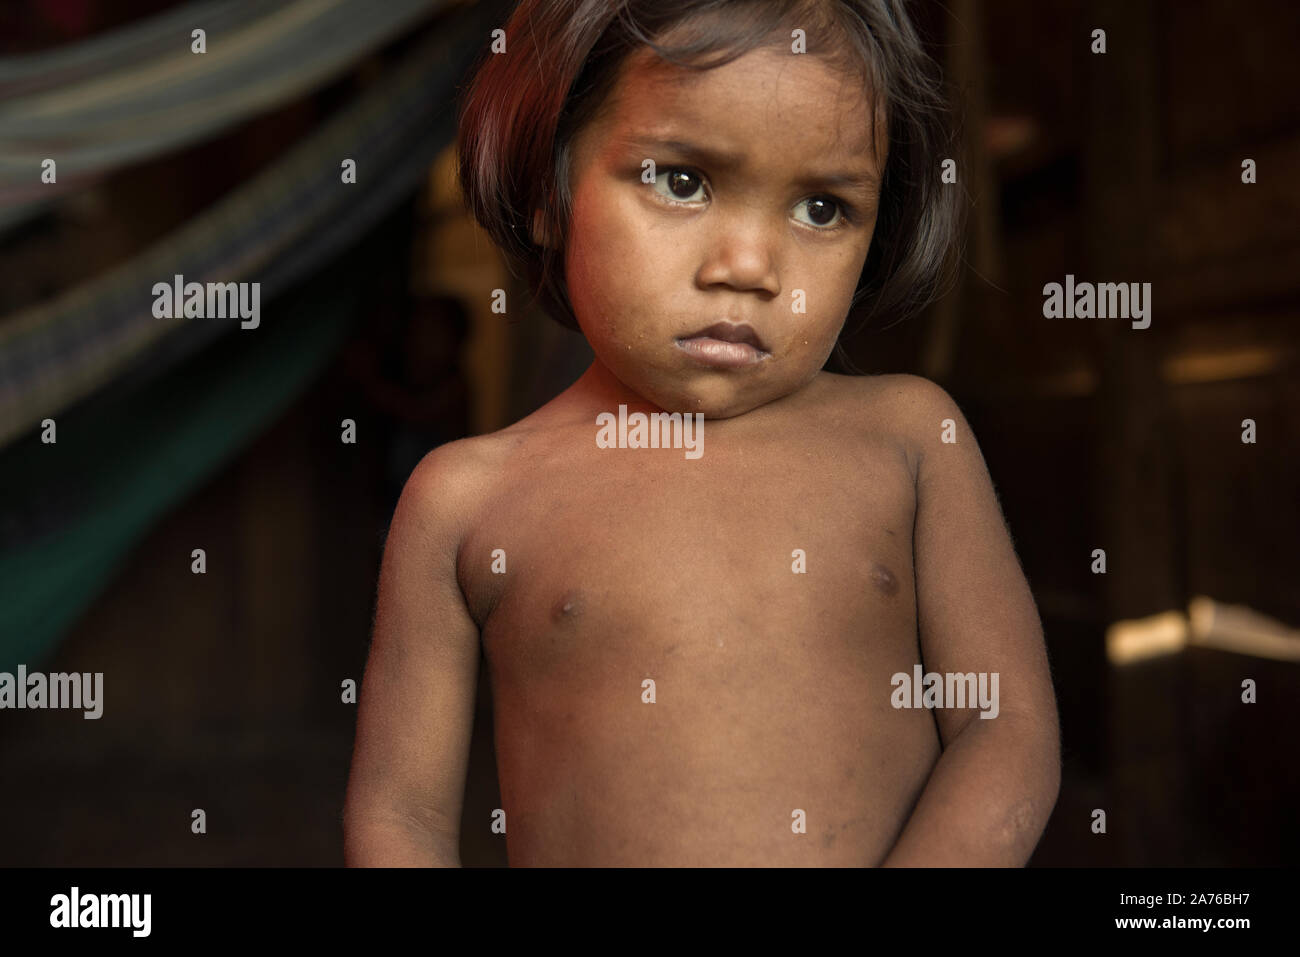 Breves, Para, Brazil - August 04, 2016: Poor Brazilian indigenous girl at home, in the riverside slums of Breves city, Stock Photo